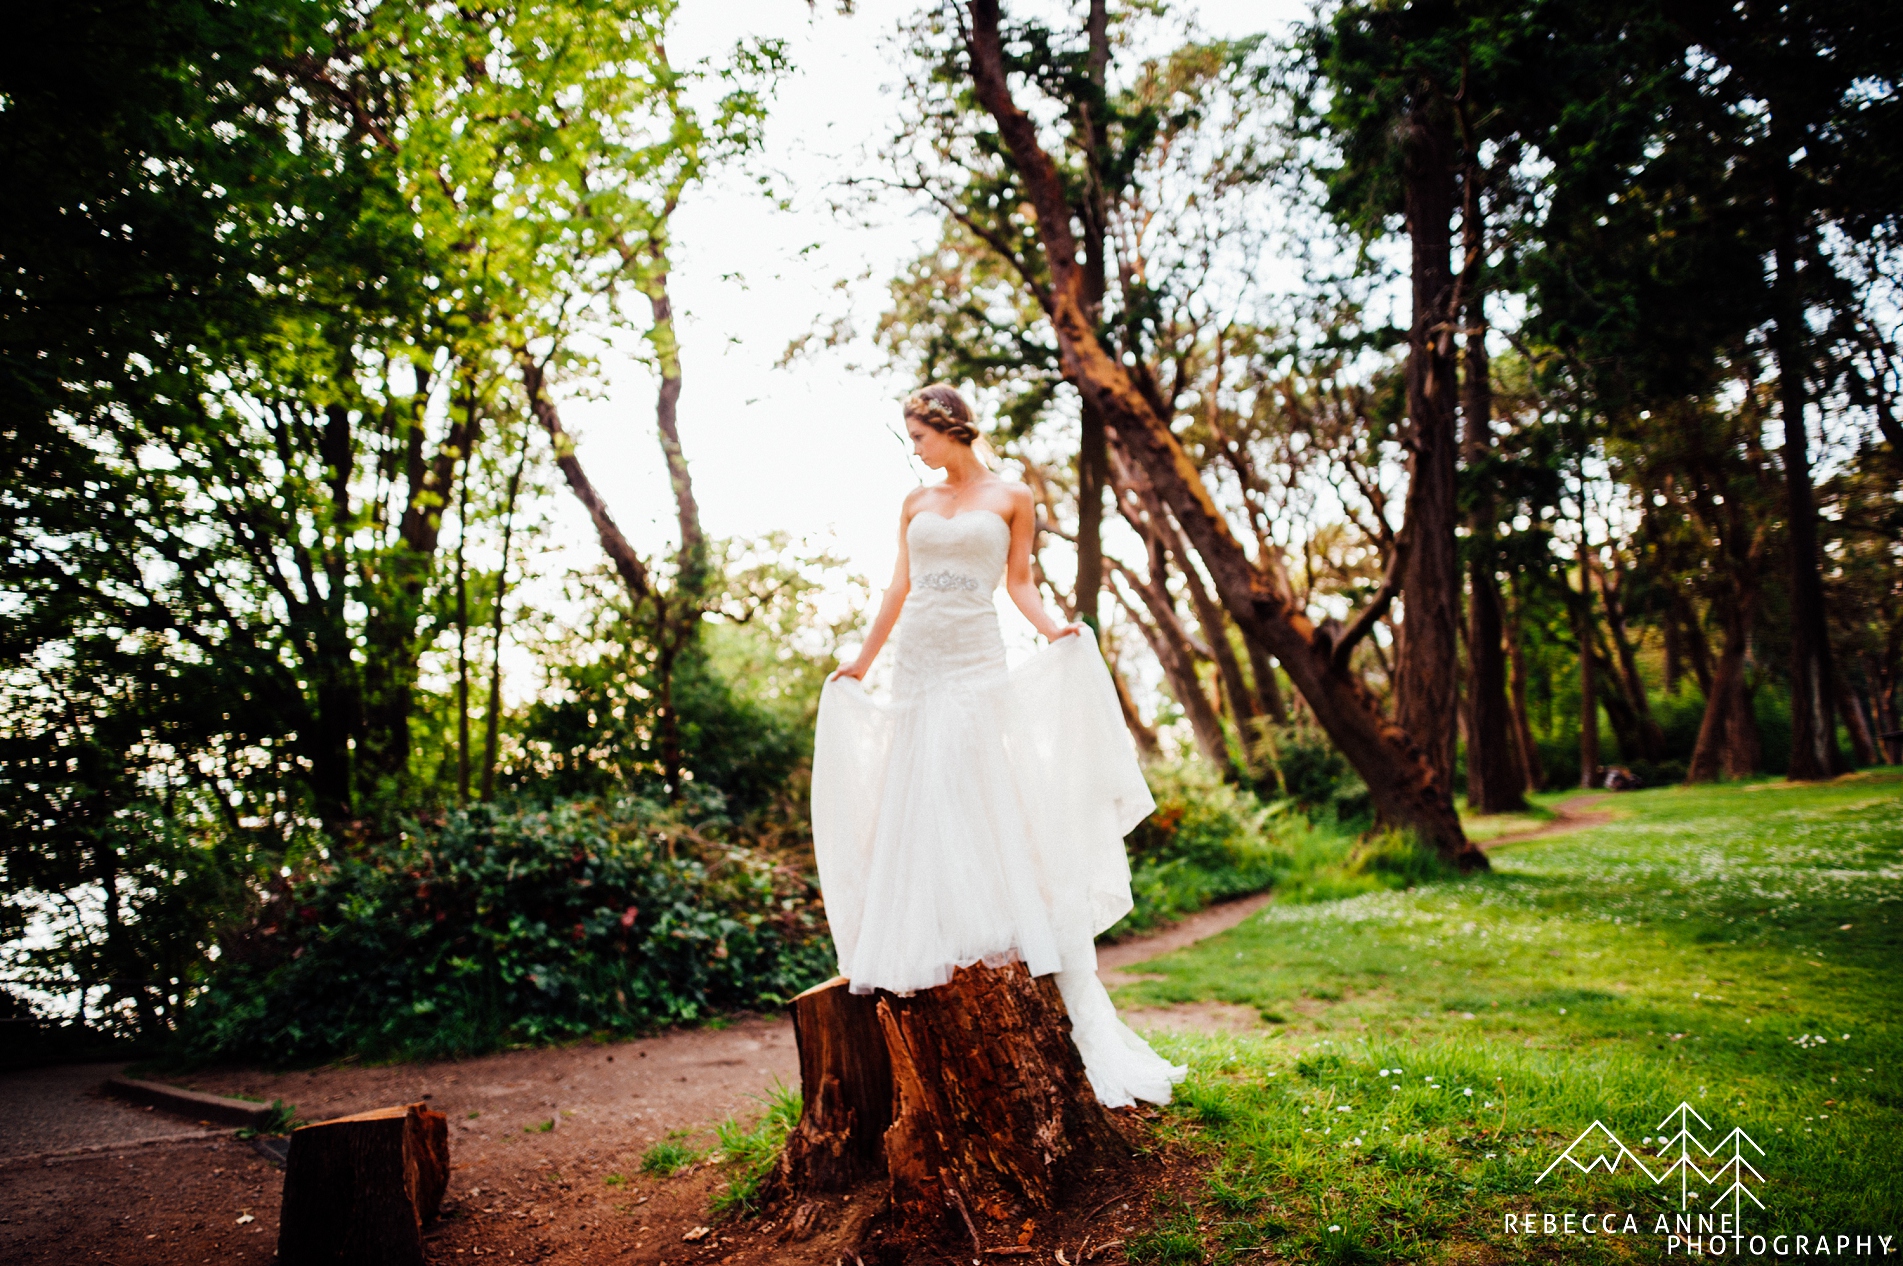 Ethereal Woodland Elopement at Lincoln Park Tacoma Seattle Wedding Photographer 93